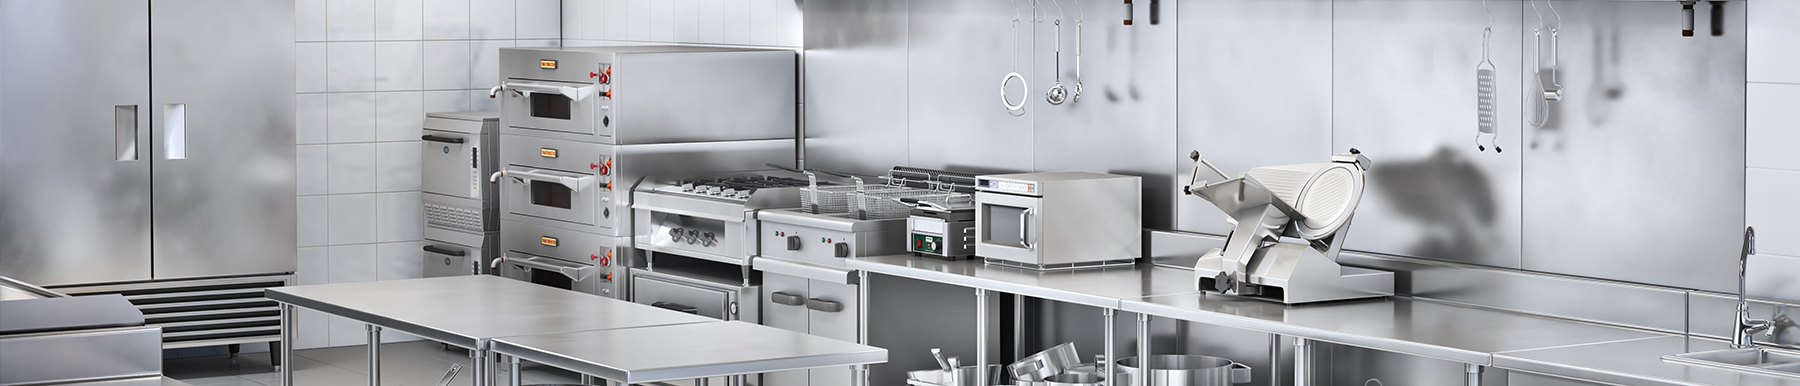 Catering Equipment Suppliers Near North Ayrshire | H2 Catering Equipment Catering Equipment